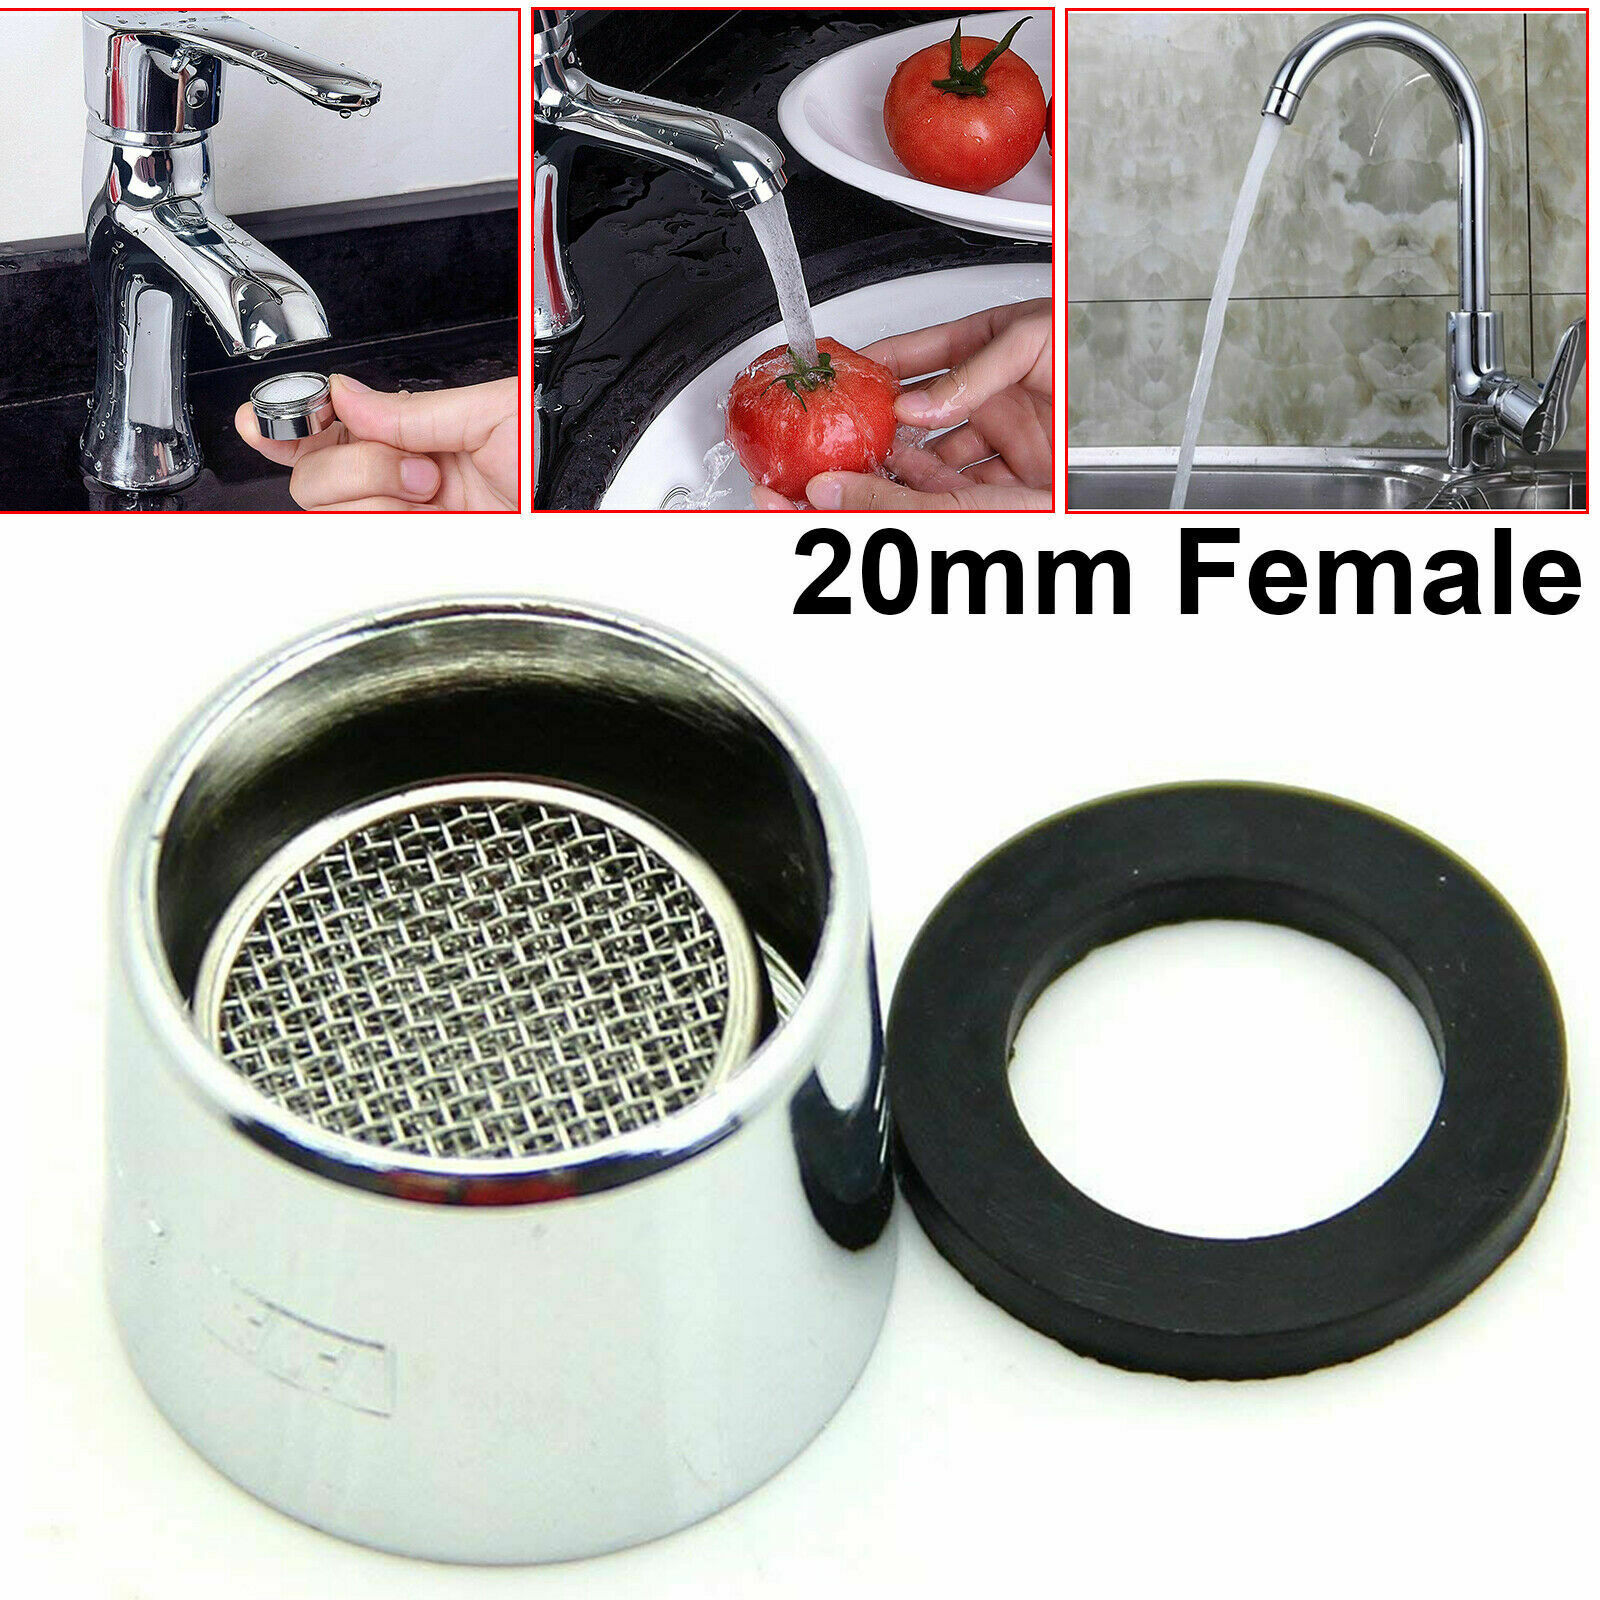 20Mm Female Tap Aerator Water Saving Faucet Nozzle Spout End Diffuser Filter